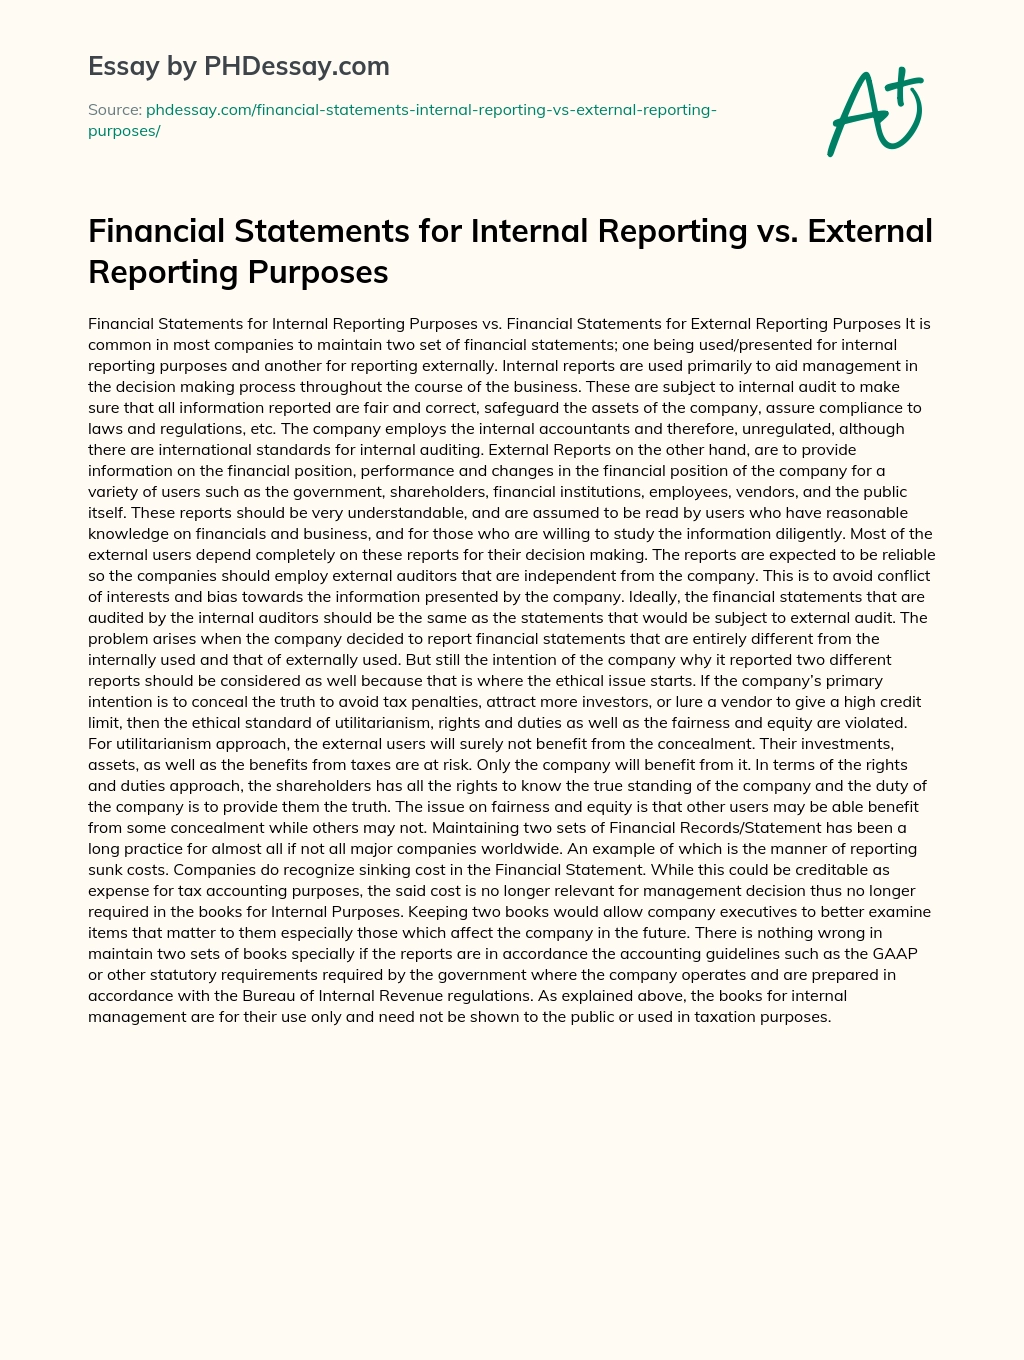 Financial Statements for Internal Reporting vs. External Reporting Purposes essay